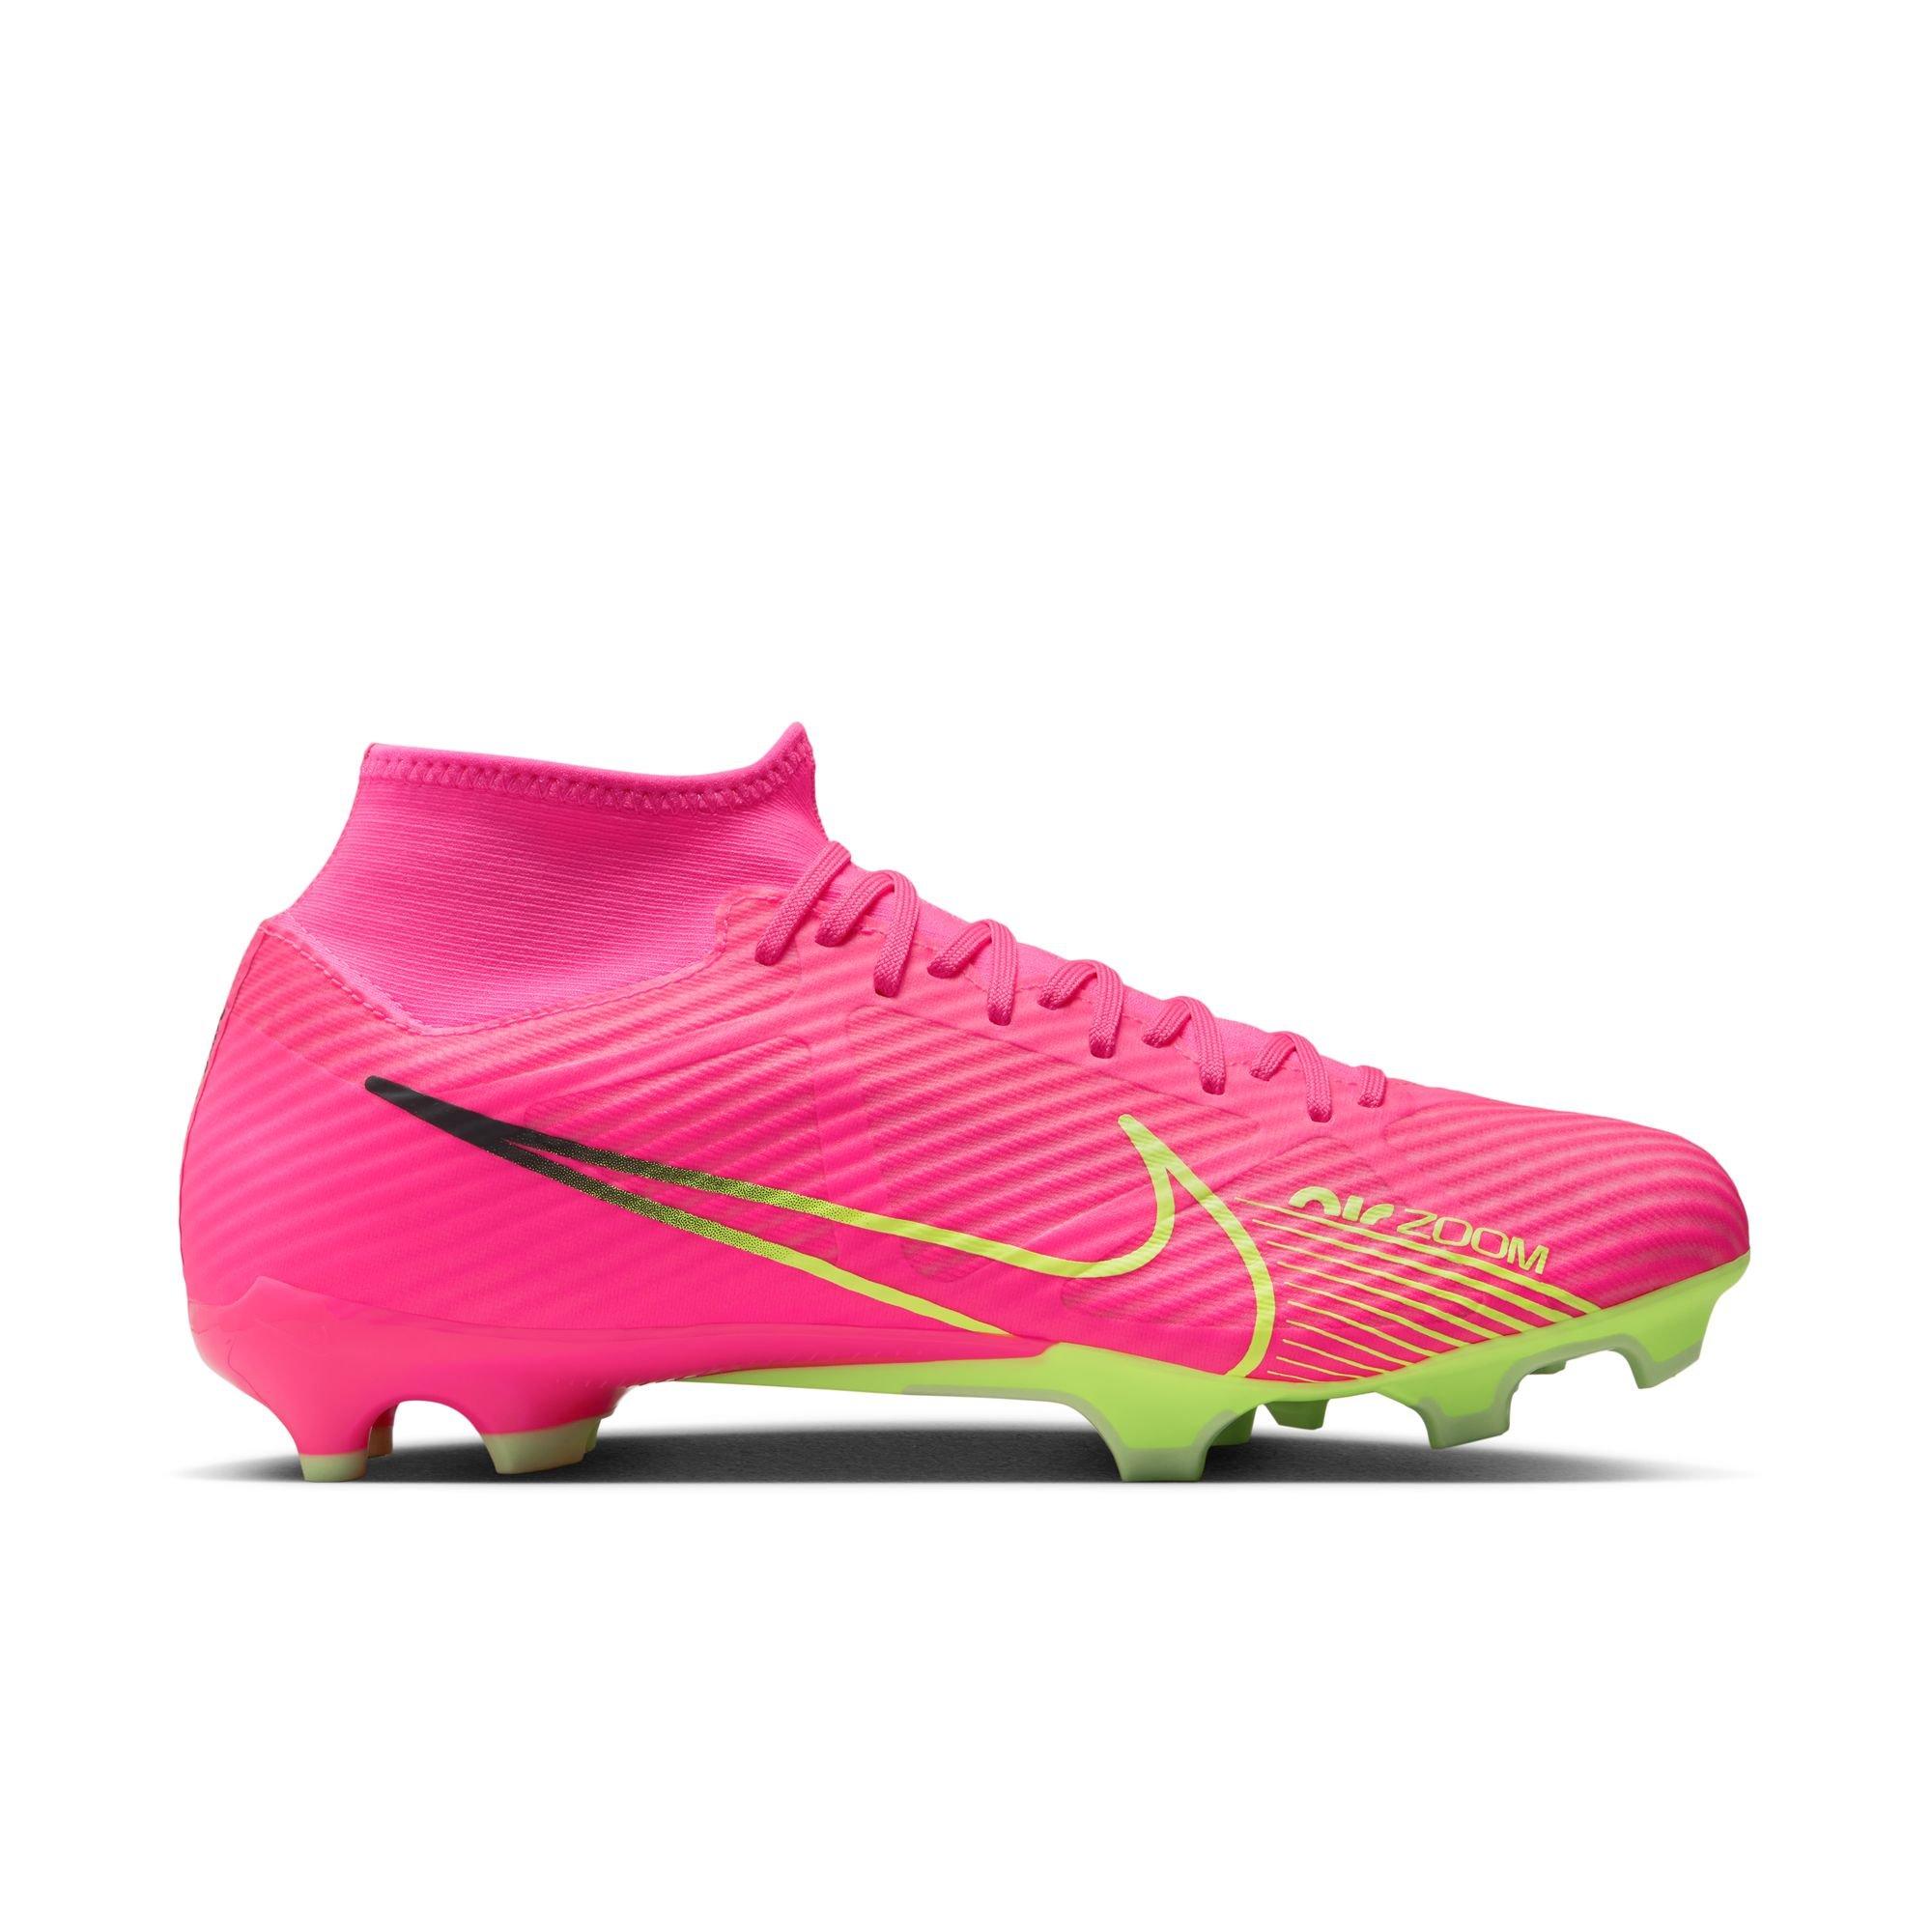 Commandant breed lening Nike Zoom Mercurial Superfly 9 Academy MG "Pink Blast/Volt/Gridiron" Men's  Soccer Cleat